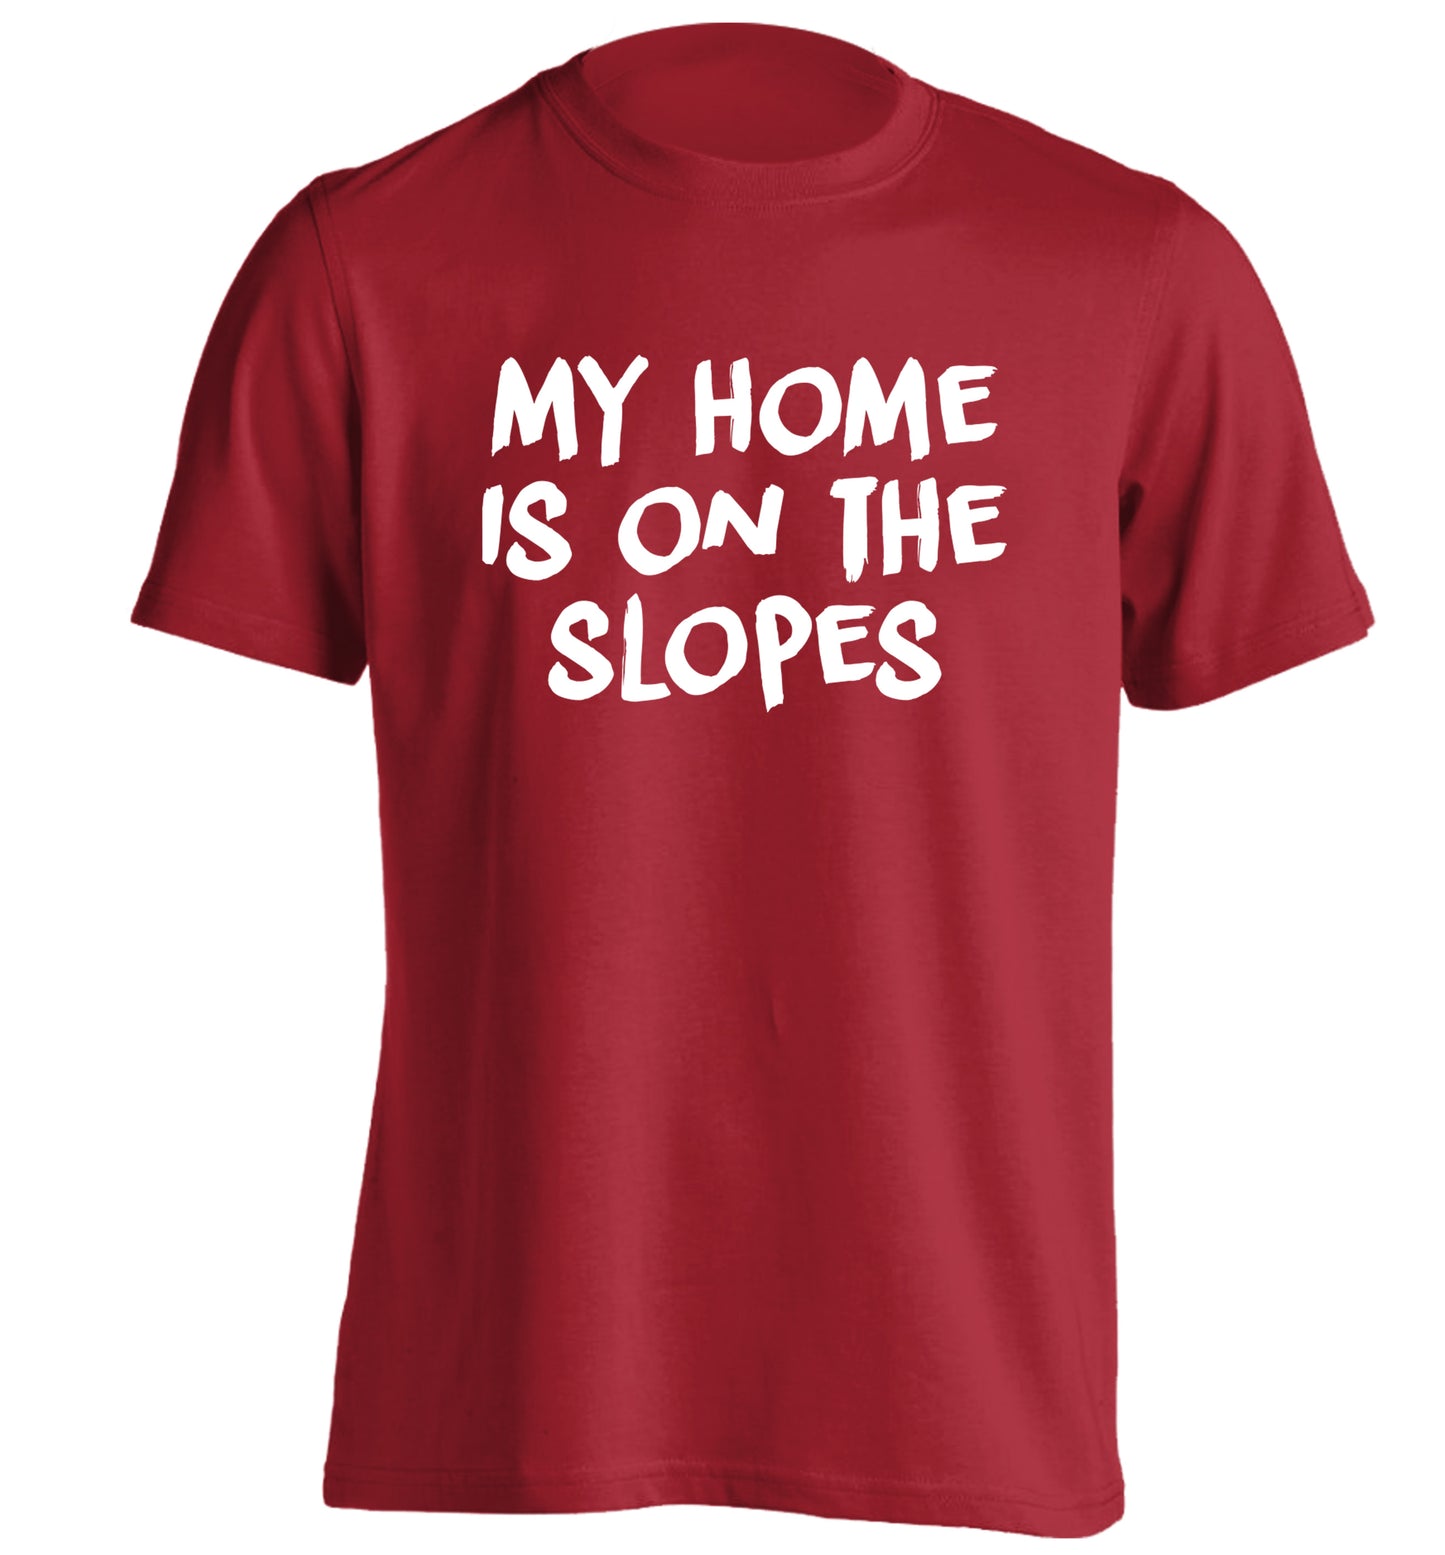 My home is on the slopes adults unisexred Tshirt 2XL